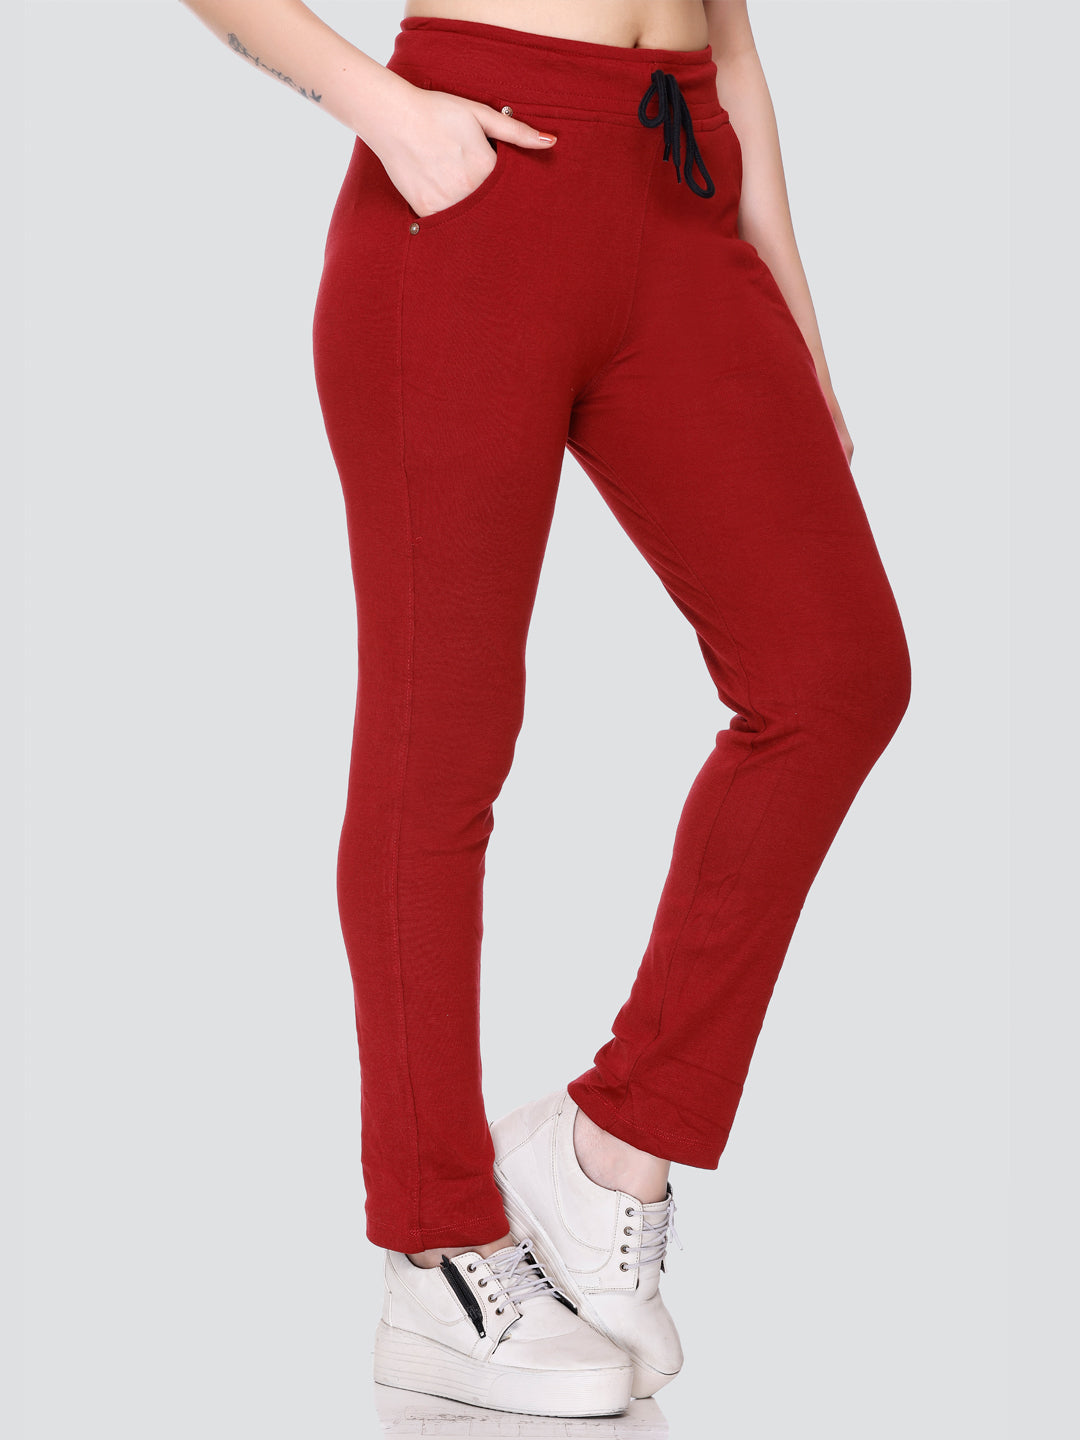 Clothina Solid Women White Track Pants  Buy Clothina Solid Women White Track  Pants Online at Best Prices in India  Flipkartcom